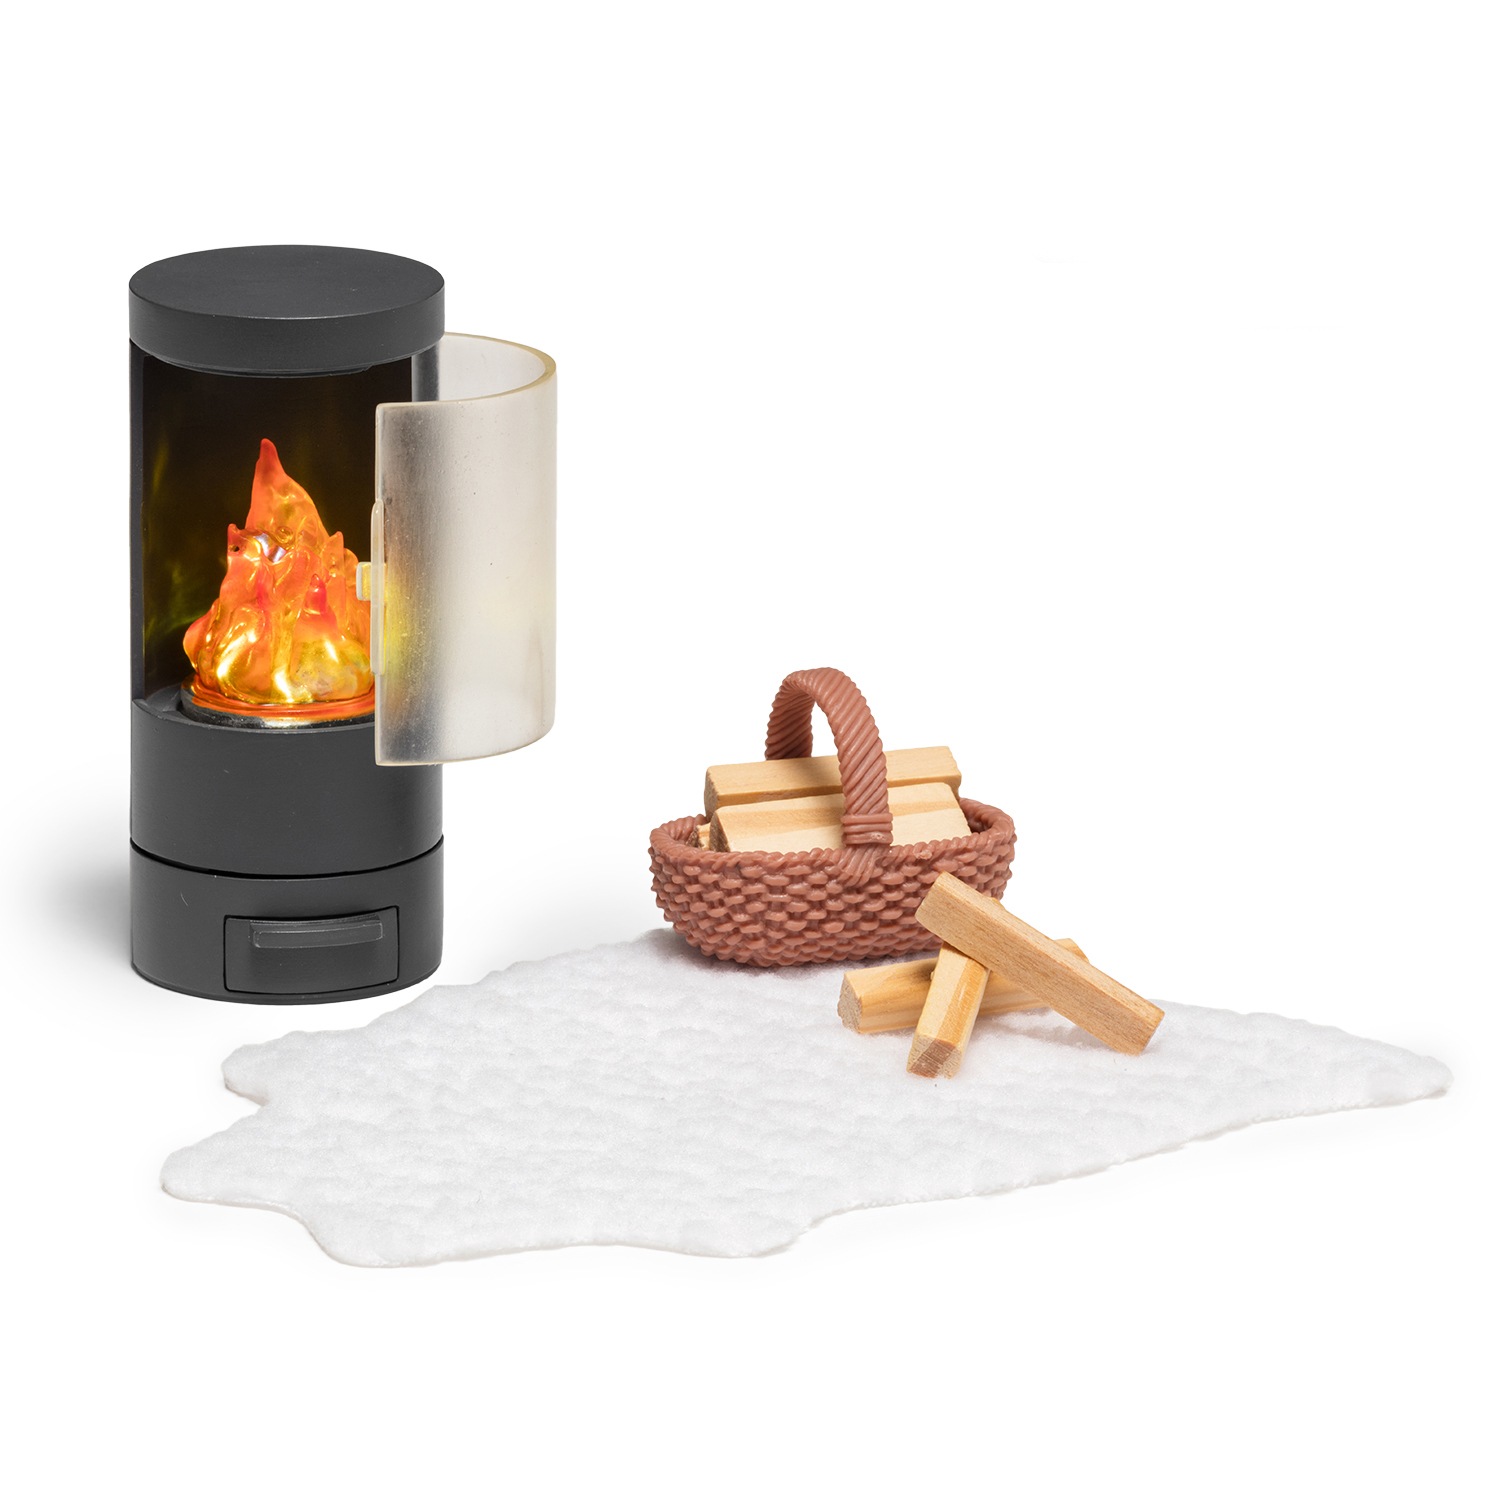 Doll house furniture & doll house accessories lundby doll house furniture log burner set with lighting